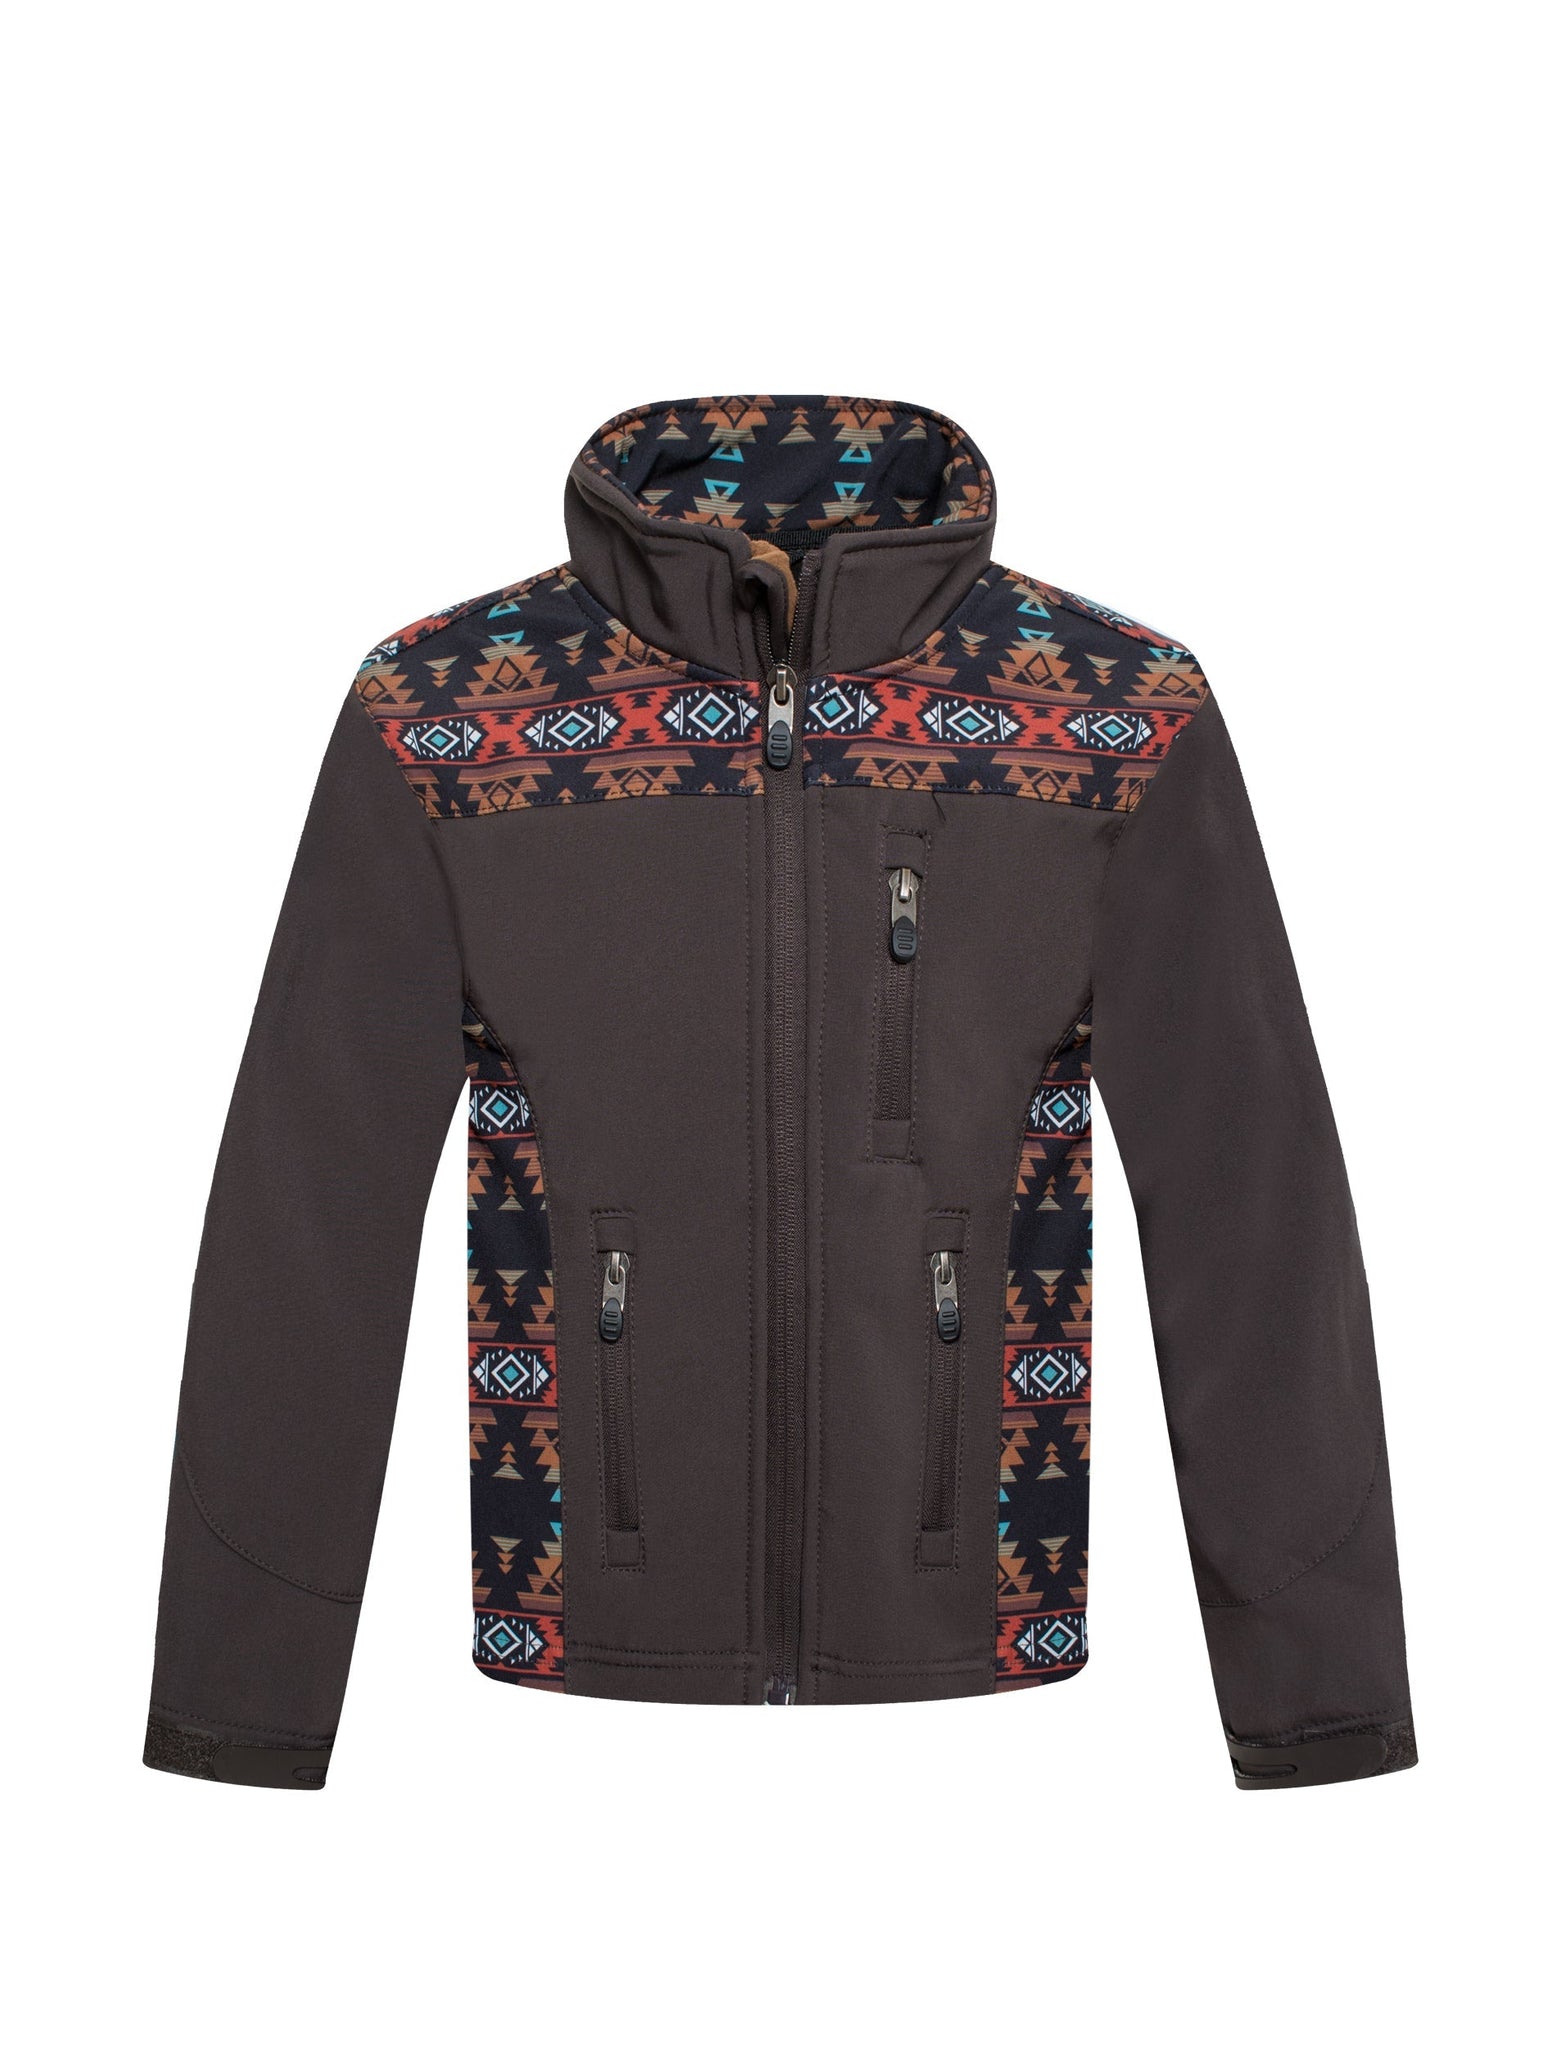 Boys Rodeo Embroidery Jacket - BNJ650-EMB-BROWN/RUST